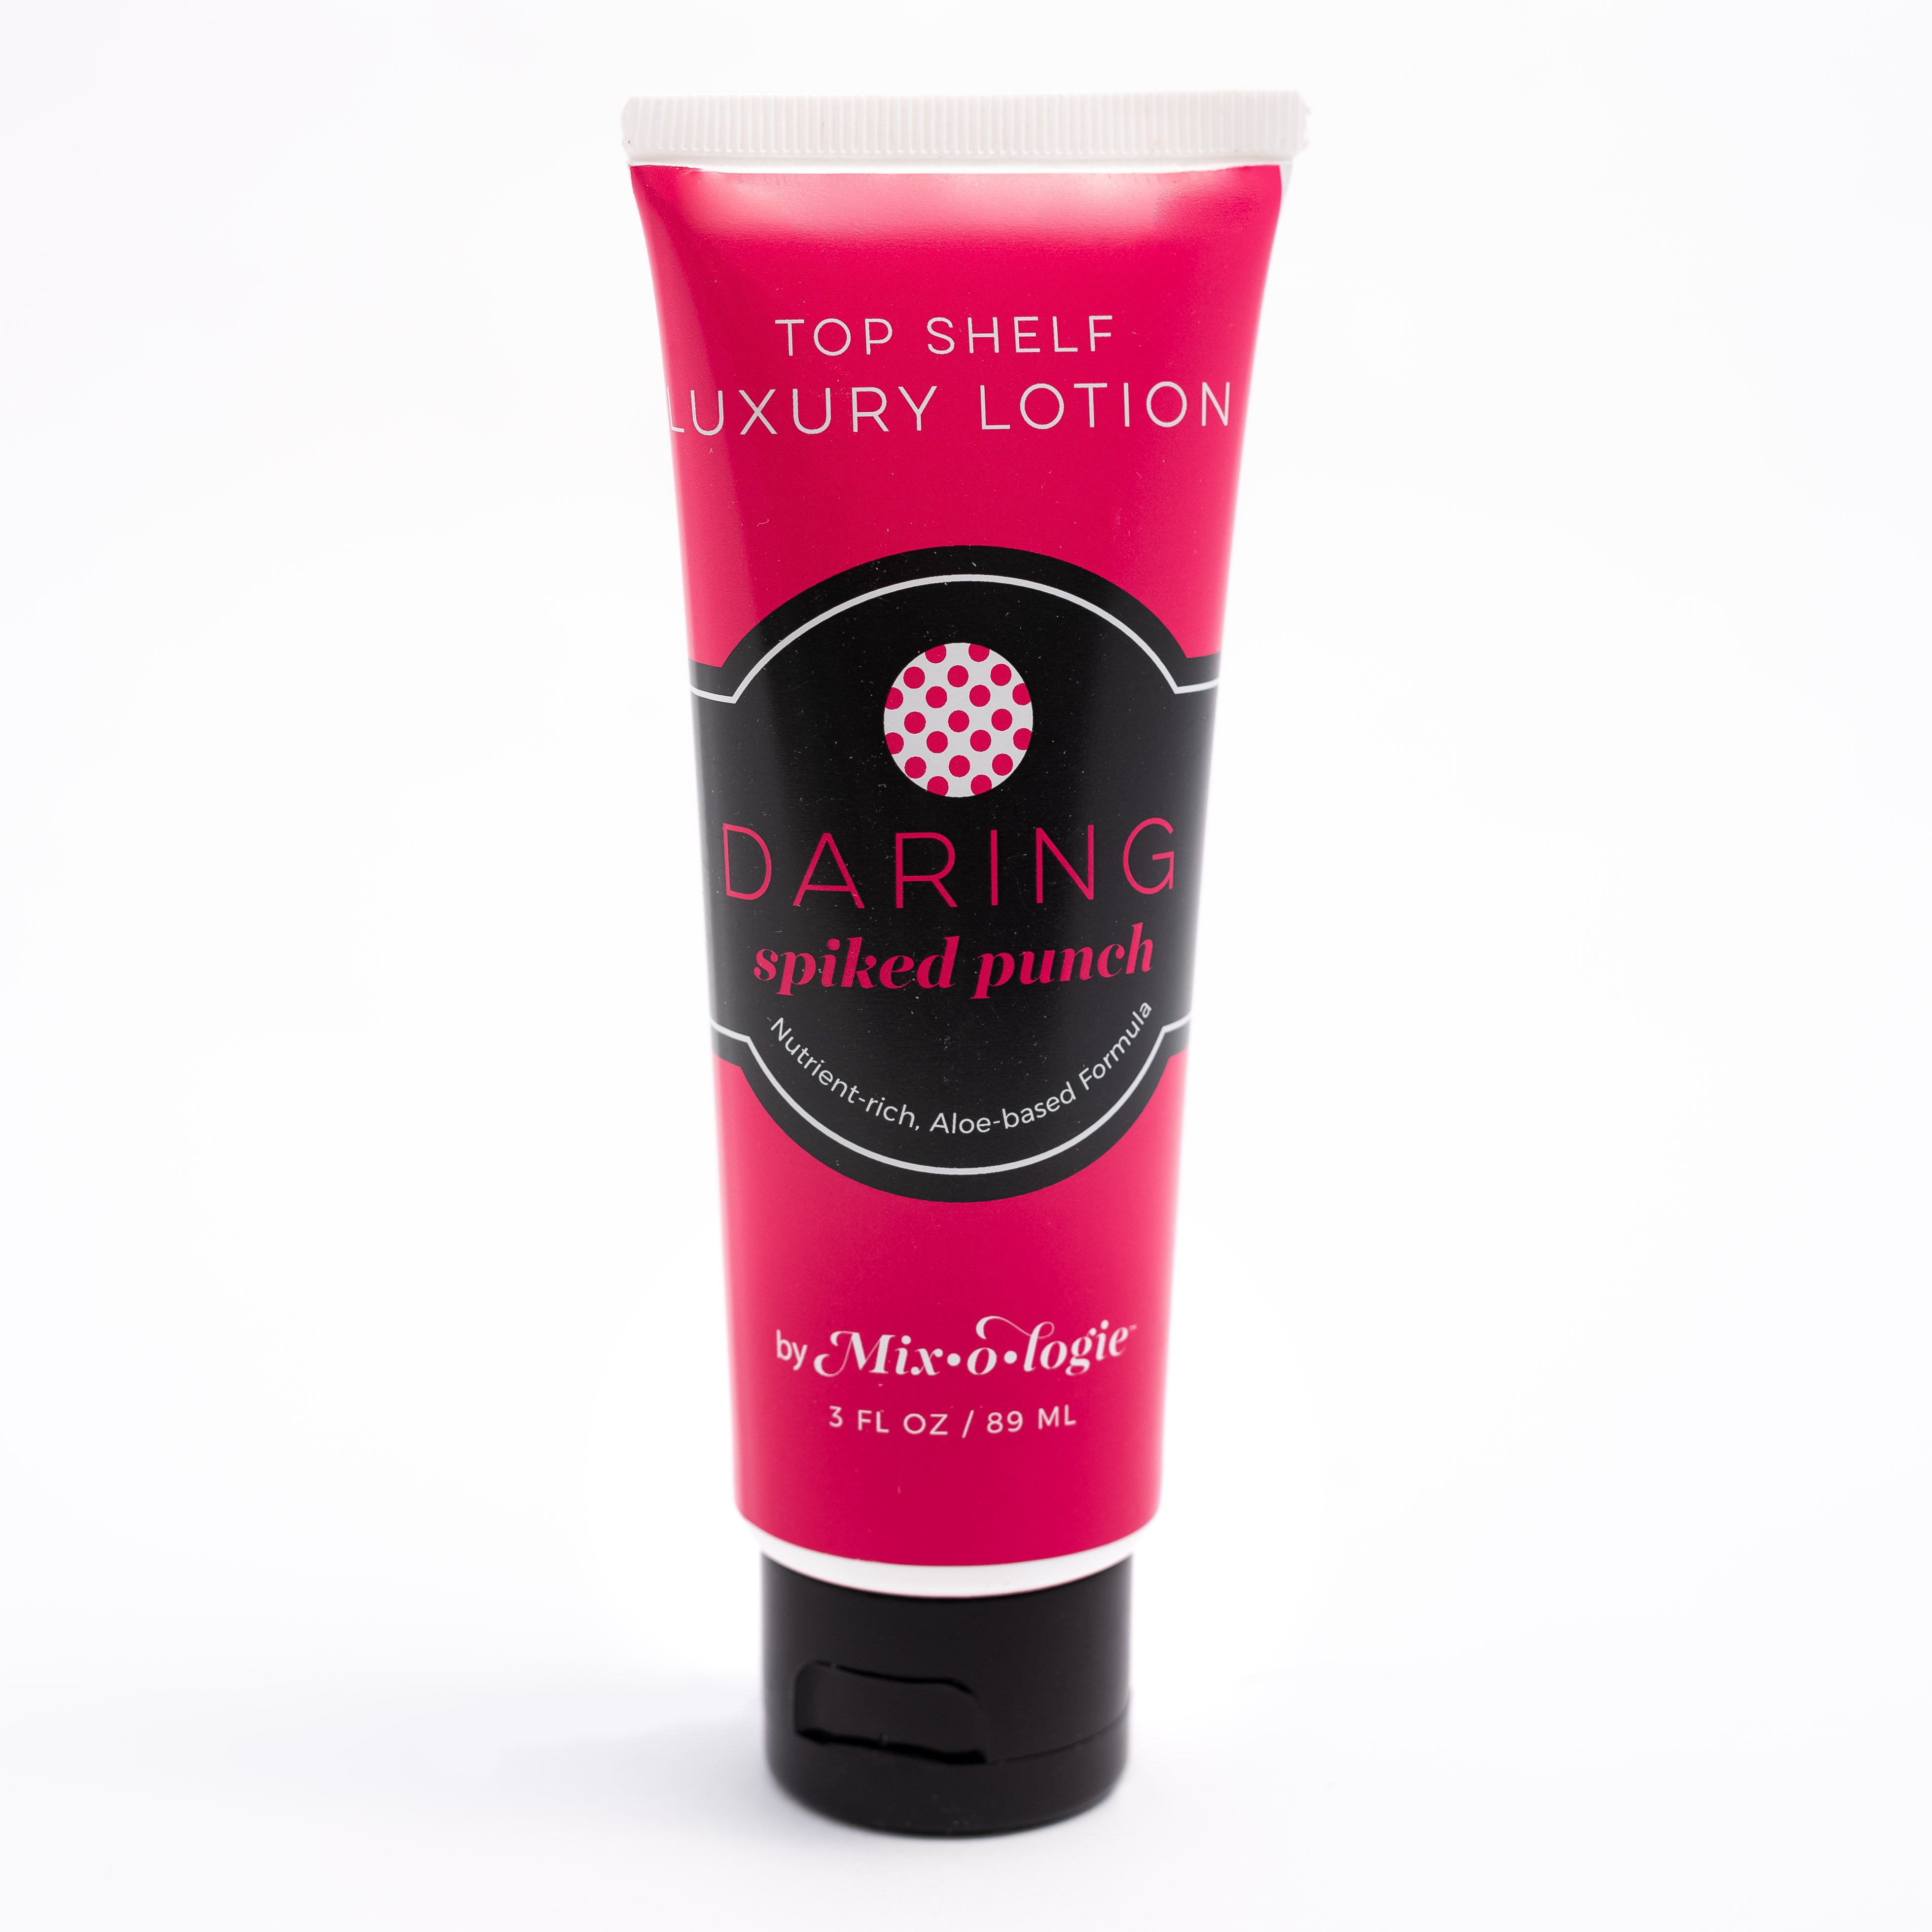 Daring (spiked punch) - Top Shelf Lotion